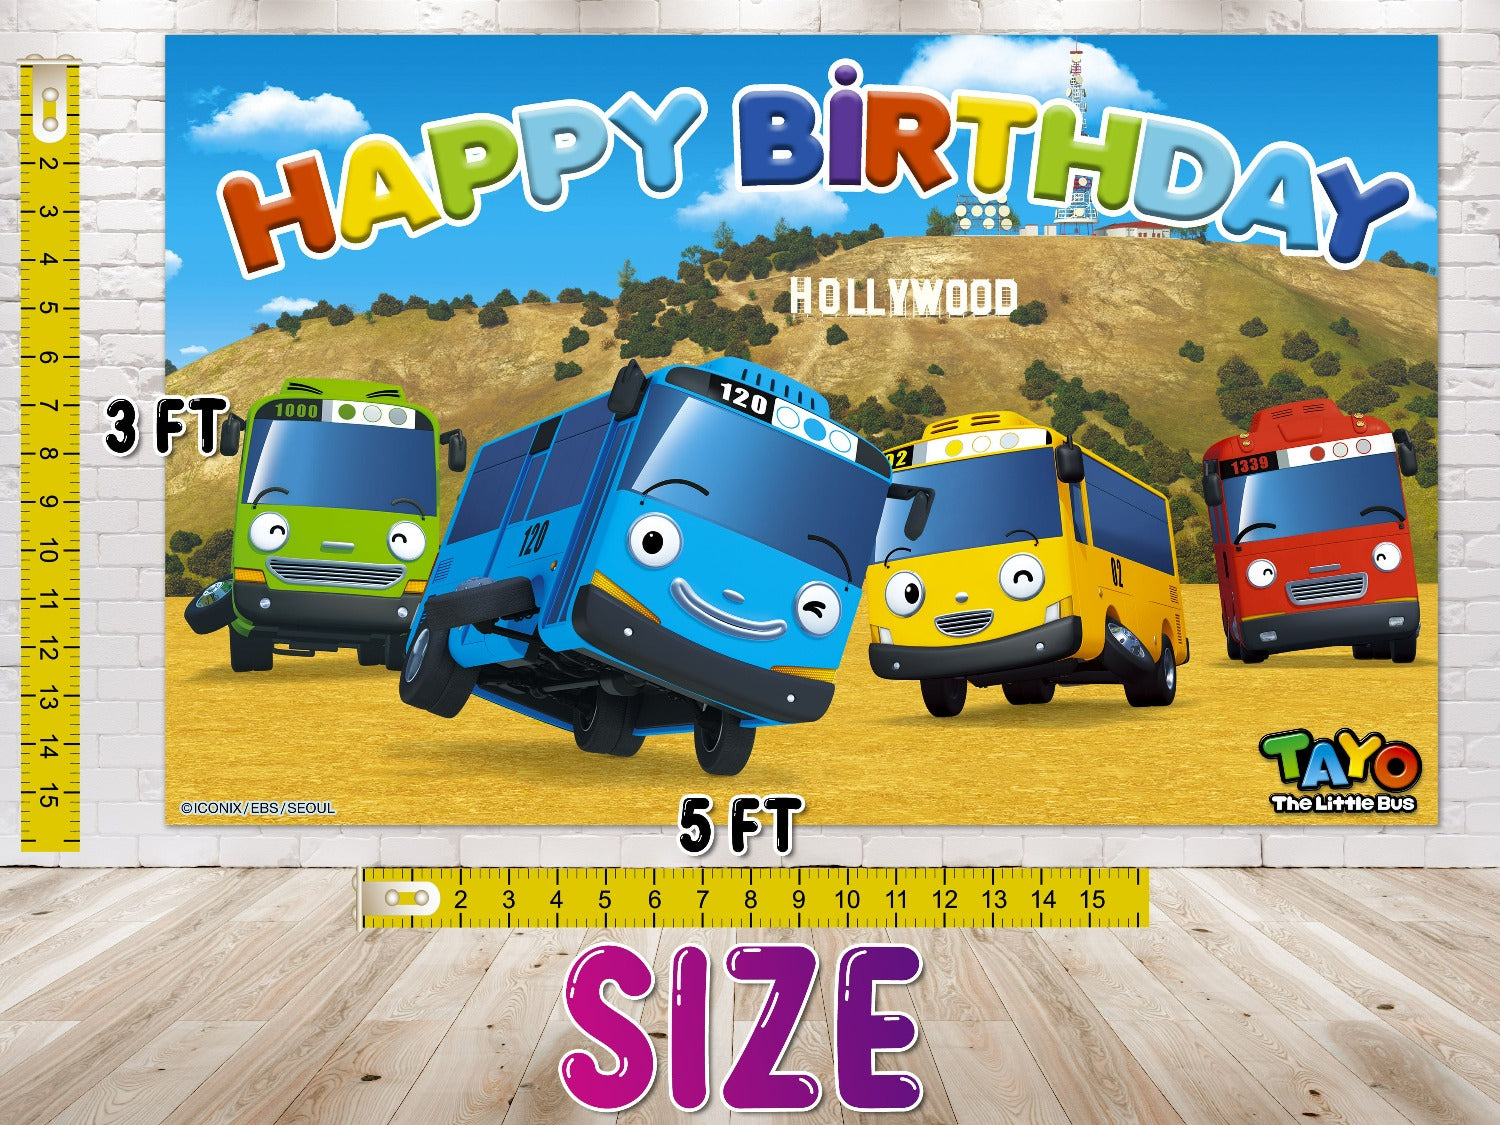 "Happy Birthday Hollywood" - Tayo the Little Bus 5x3 FT Party Backdrop